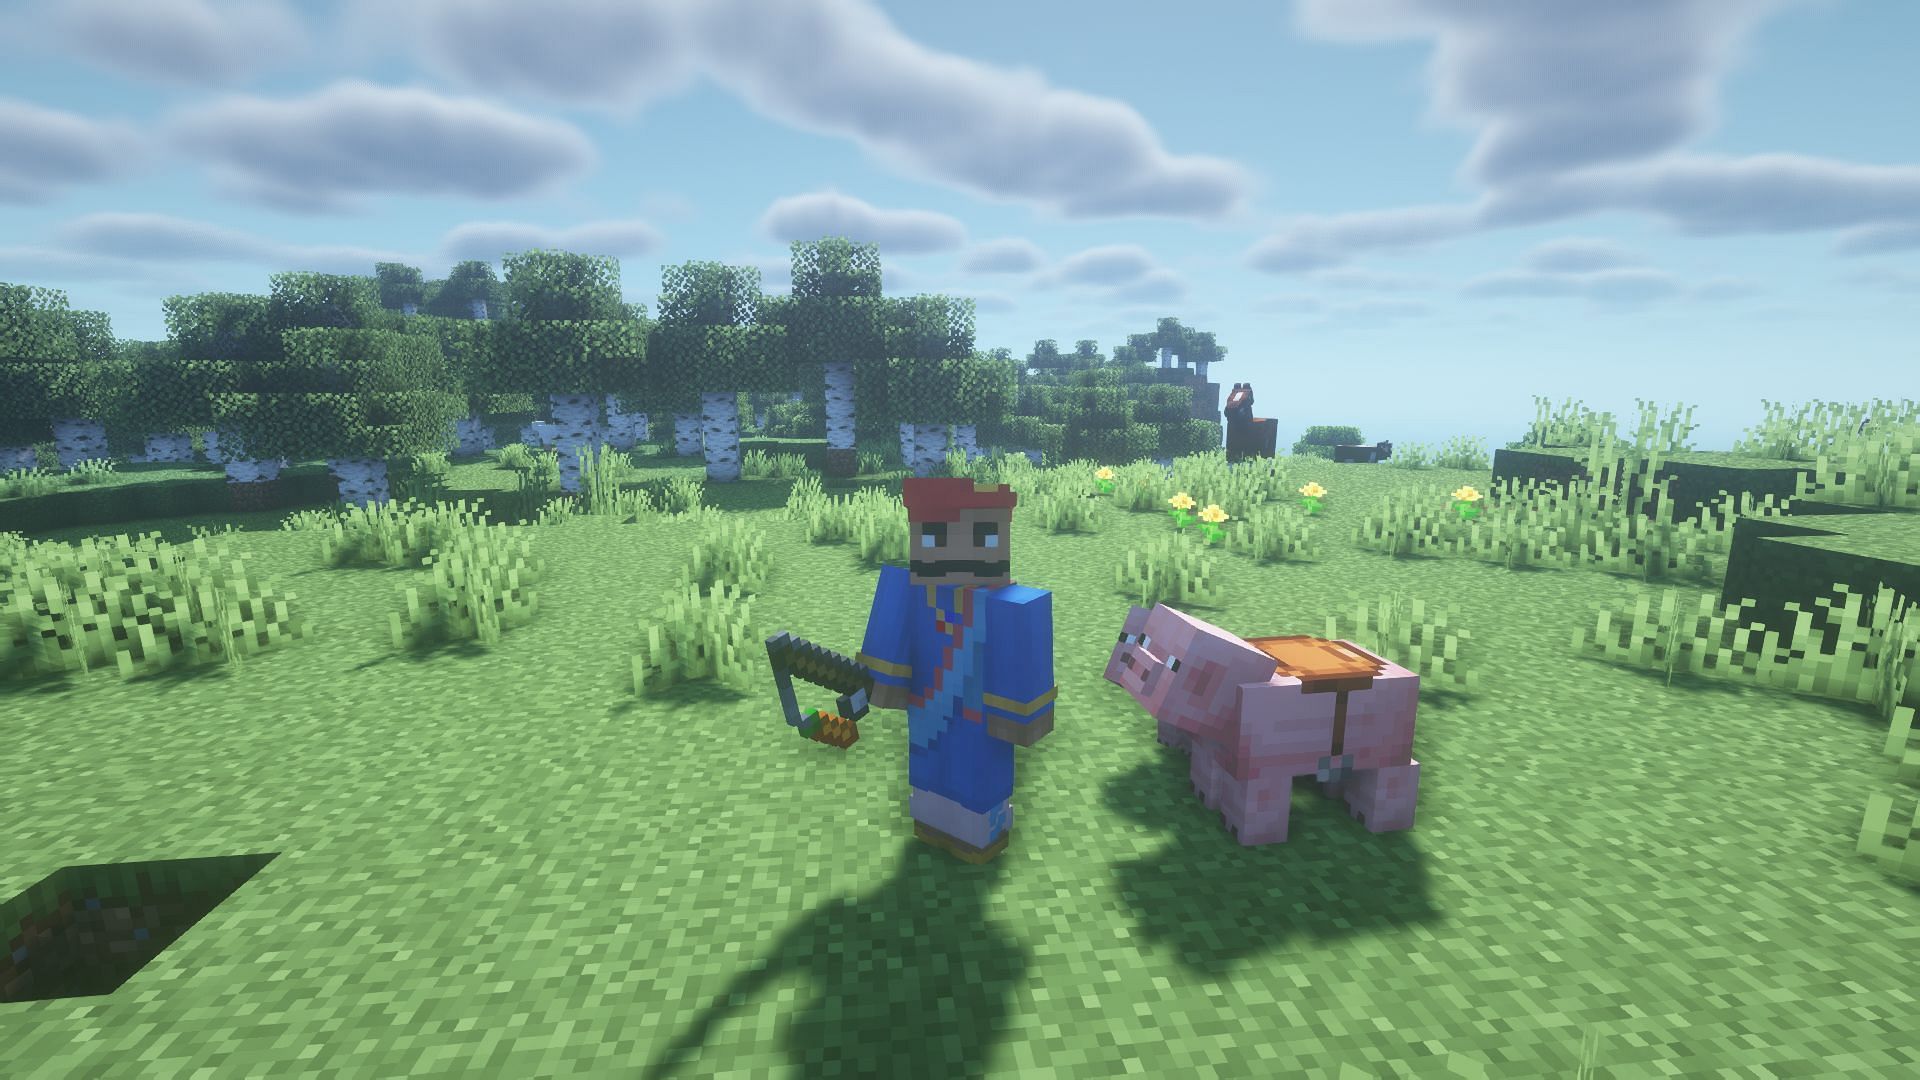 A Pig with a saddle equipped (Image via Minecraft)